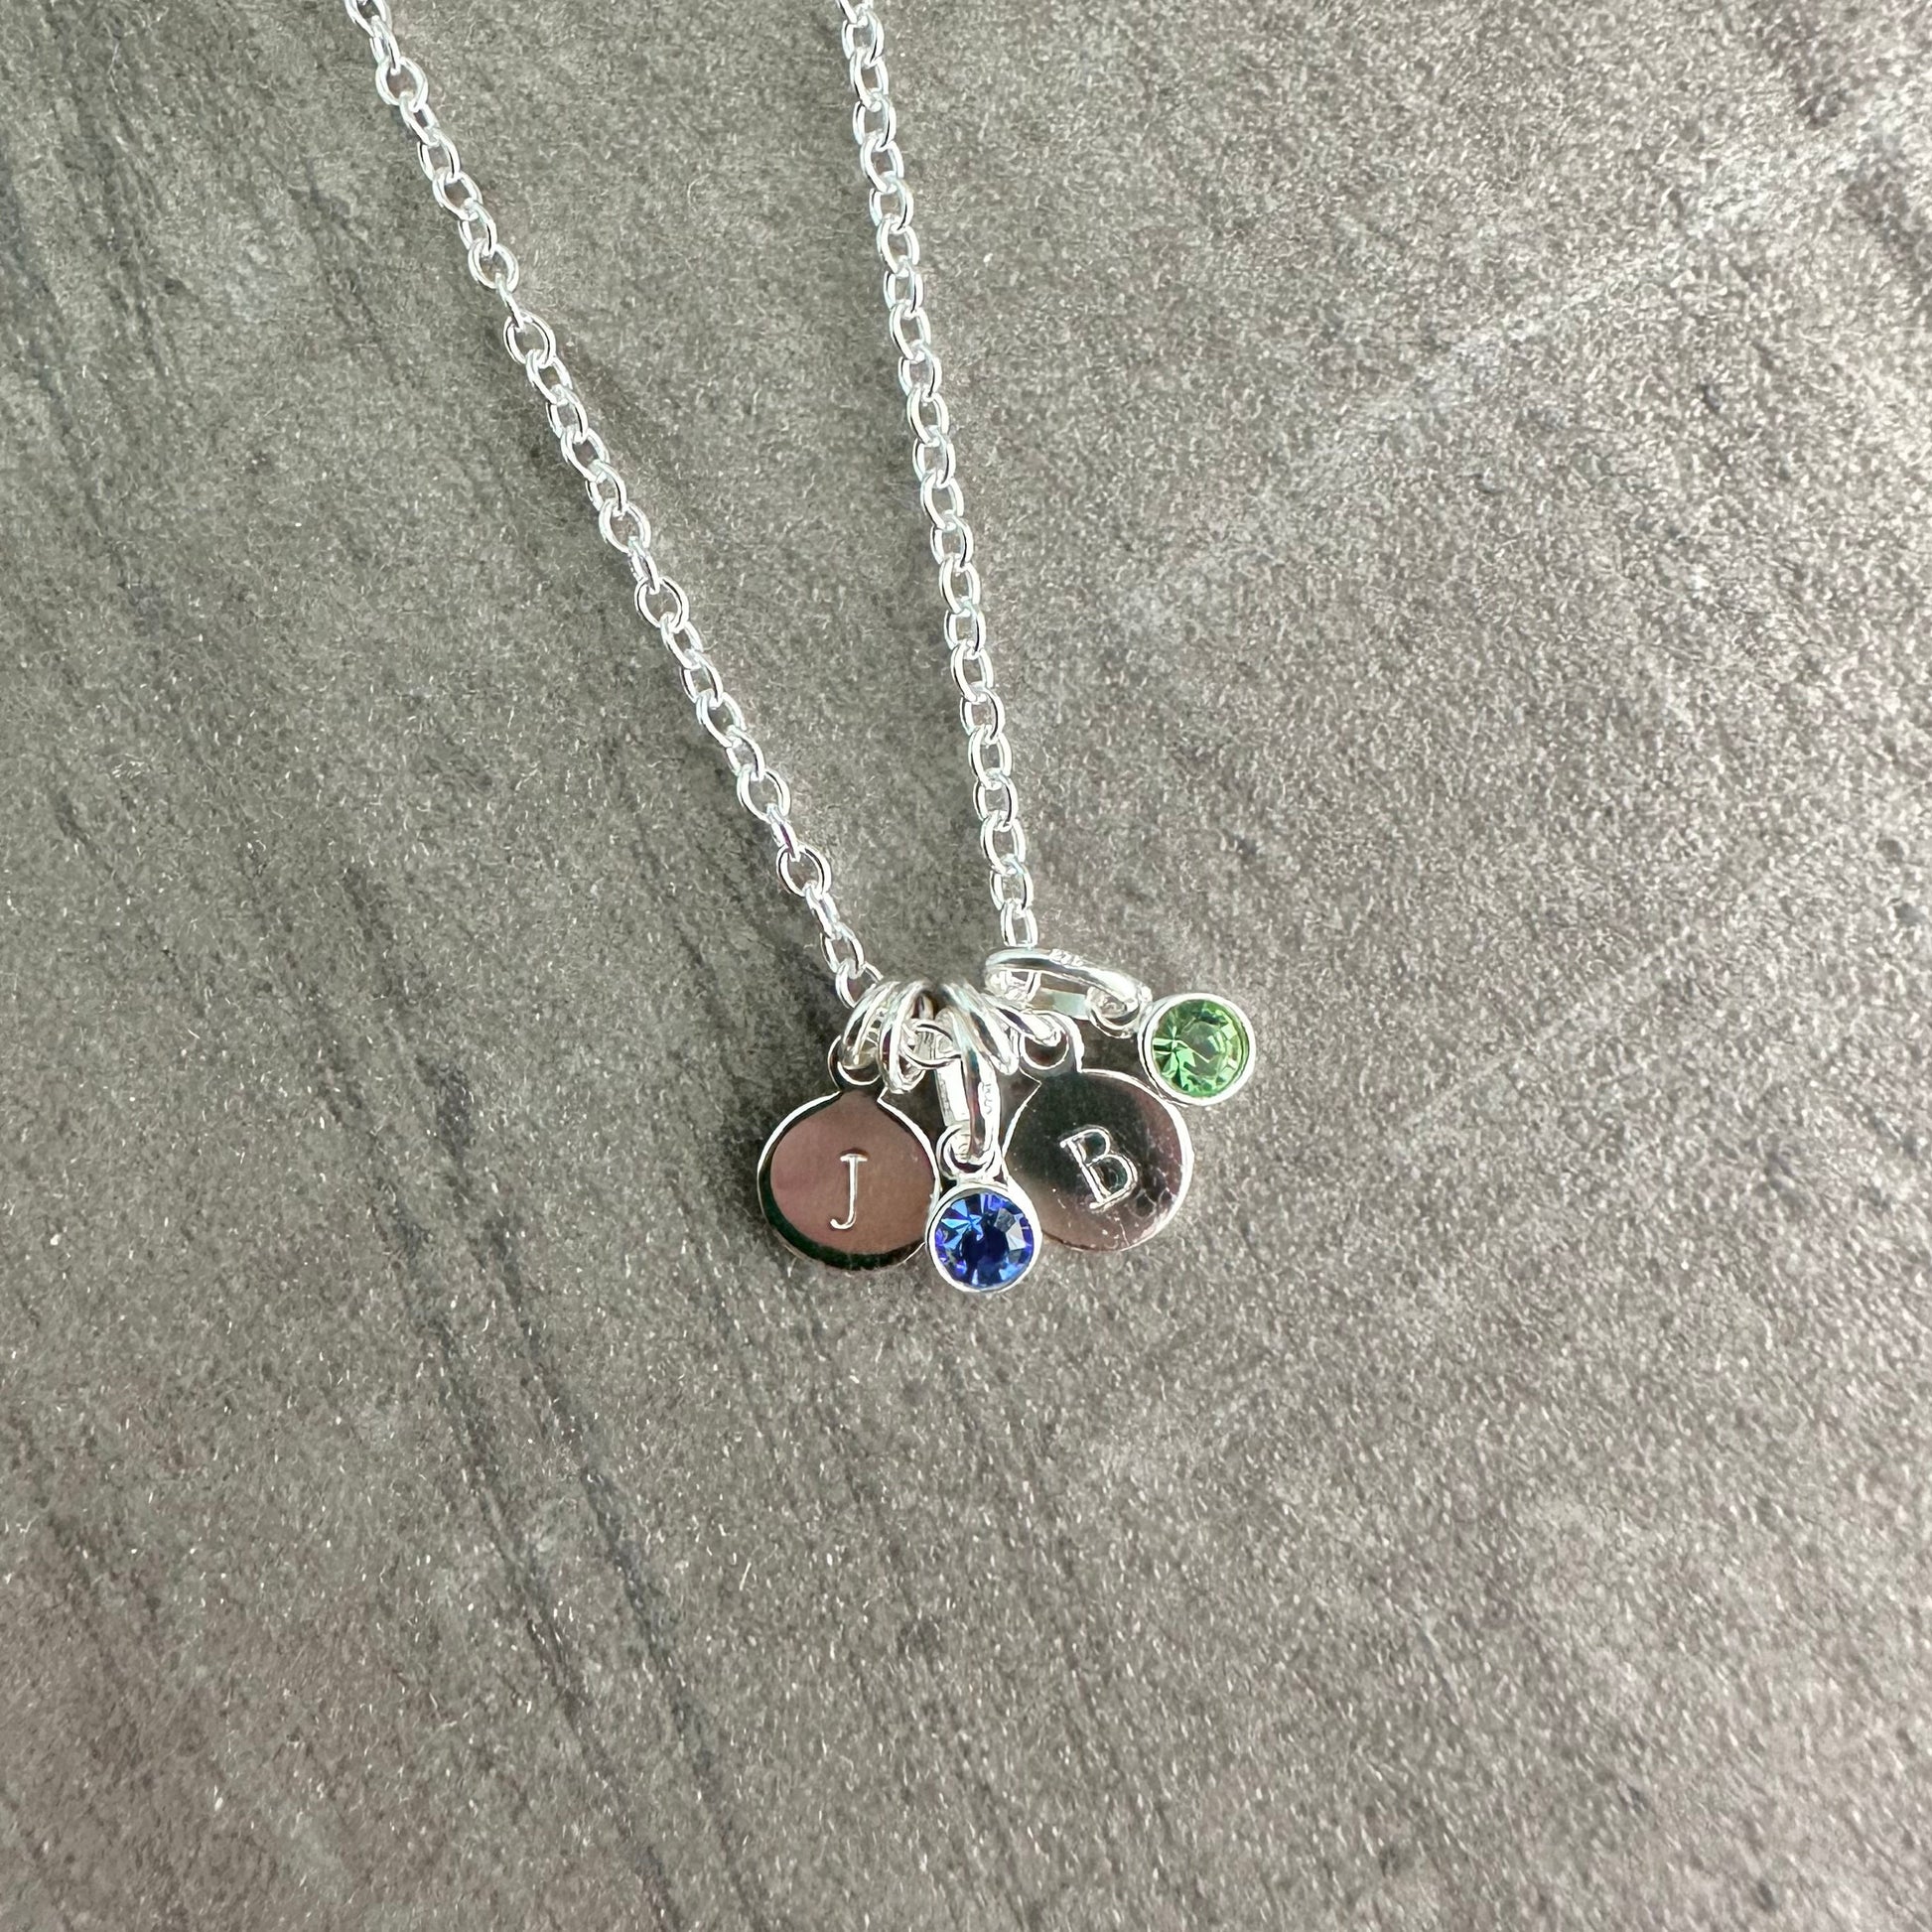 Initials Necklace with Crystal Birthstone Charms, Sentimental Gift for Mum